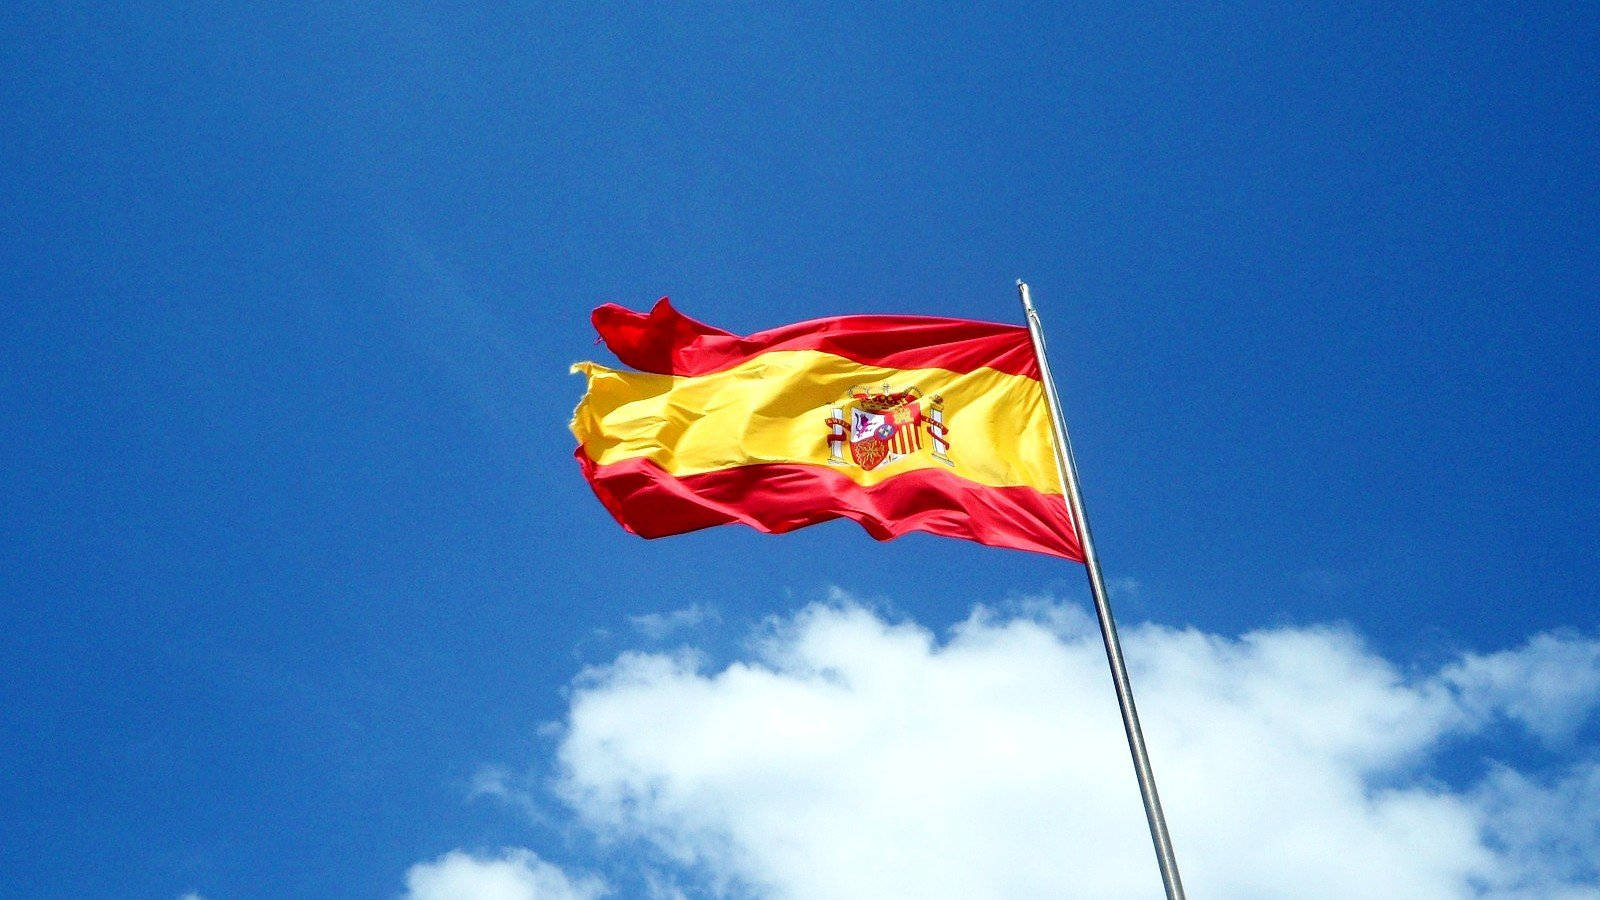 Majestic Spanish Flag In Mid-air Wallpaper